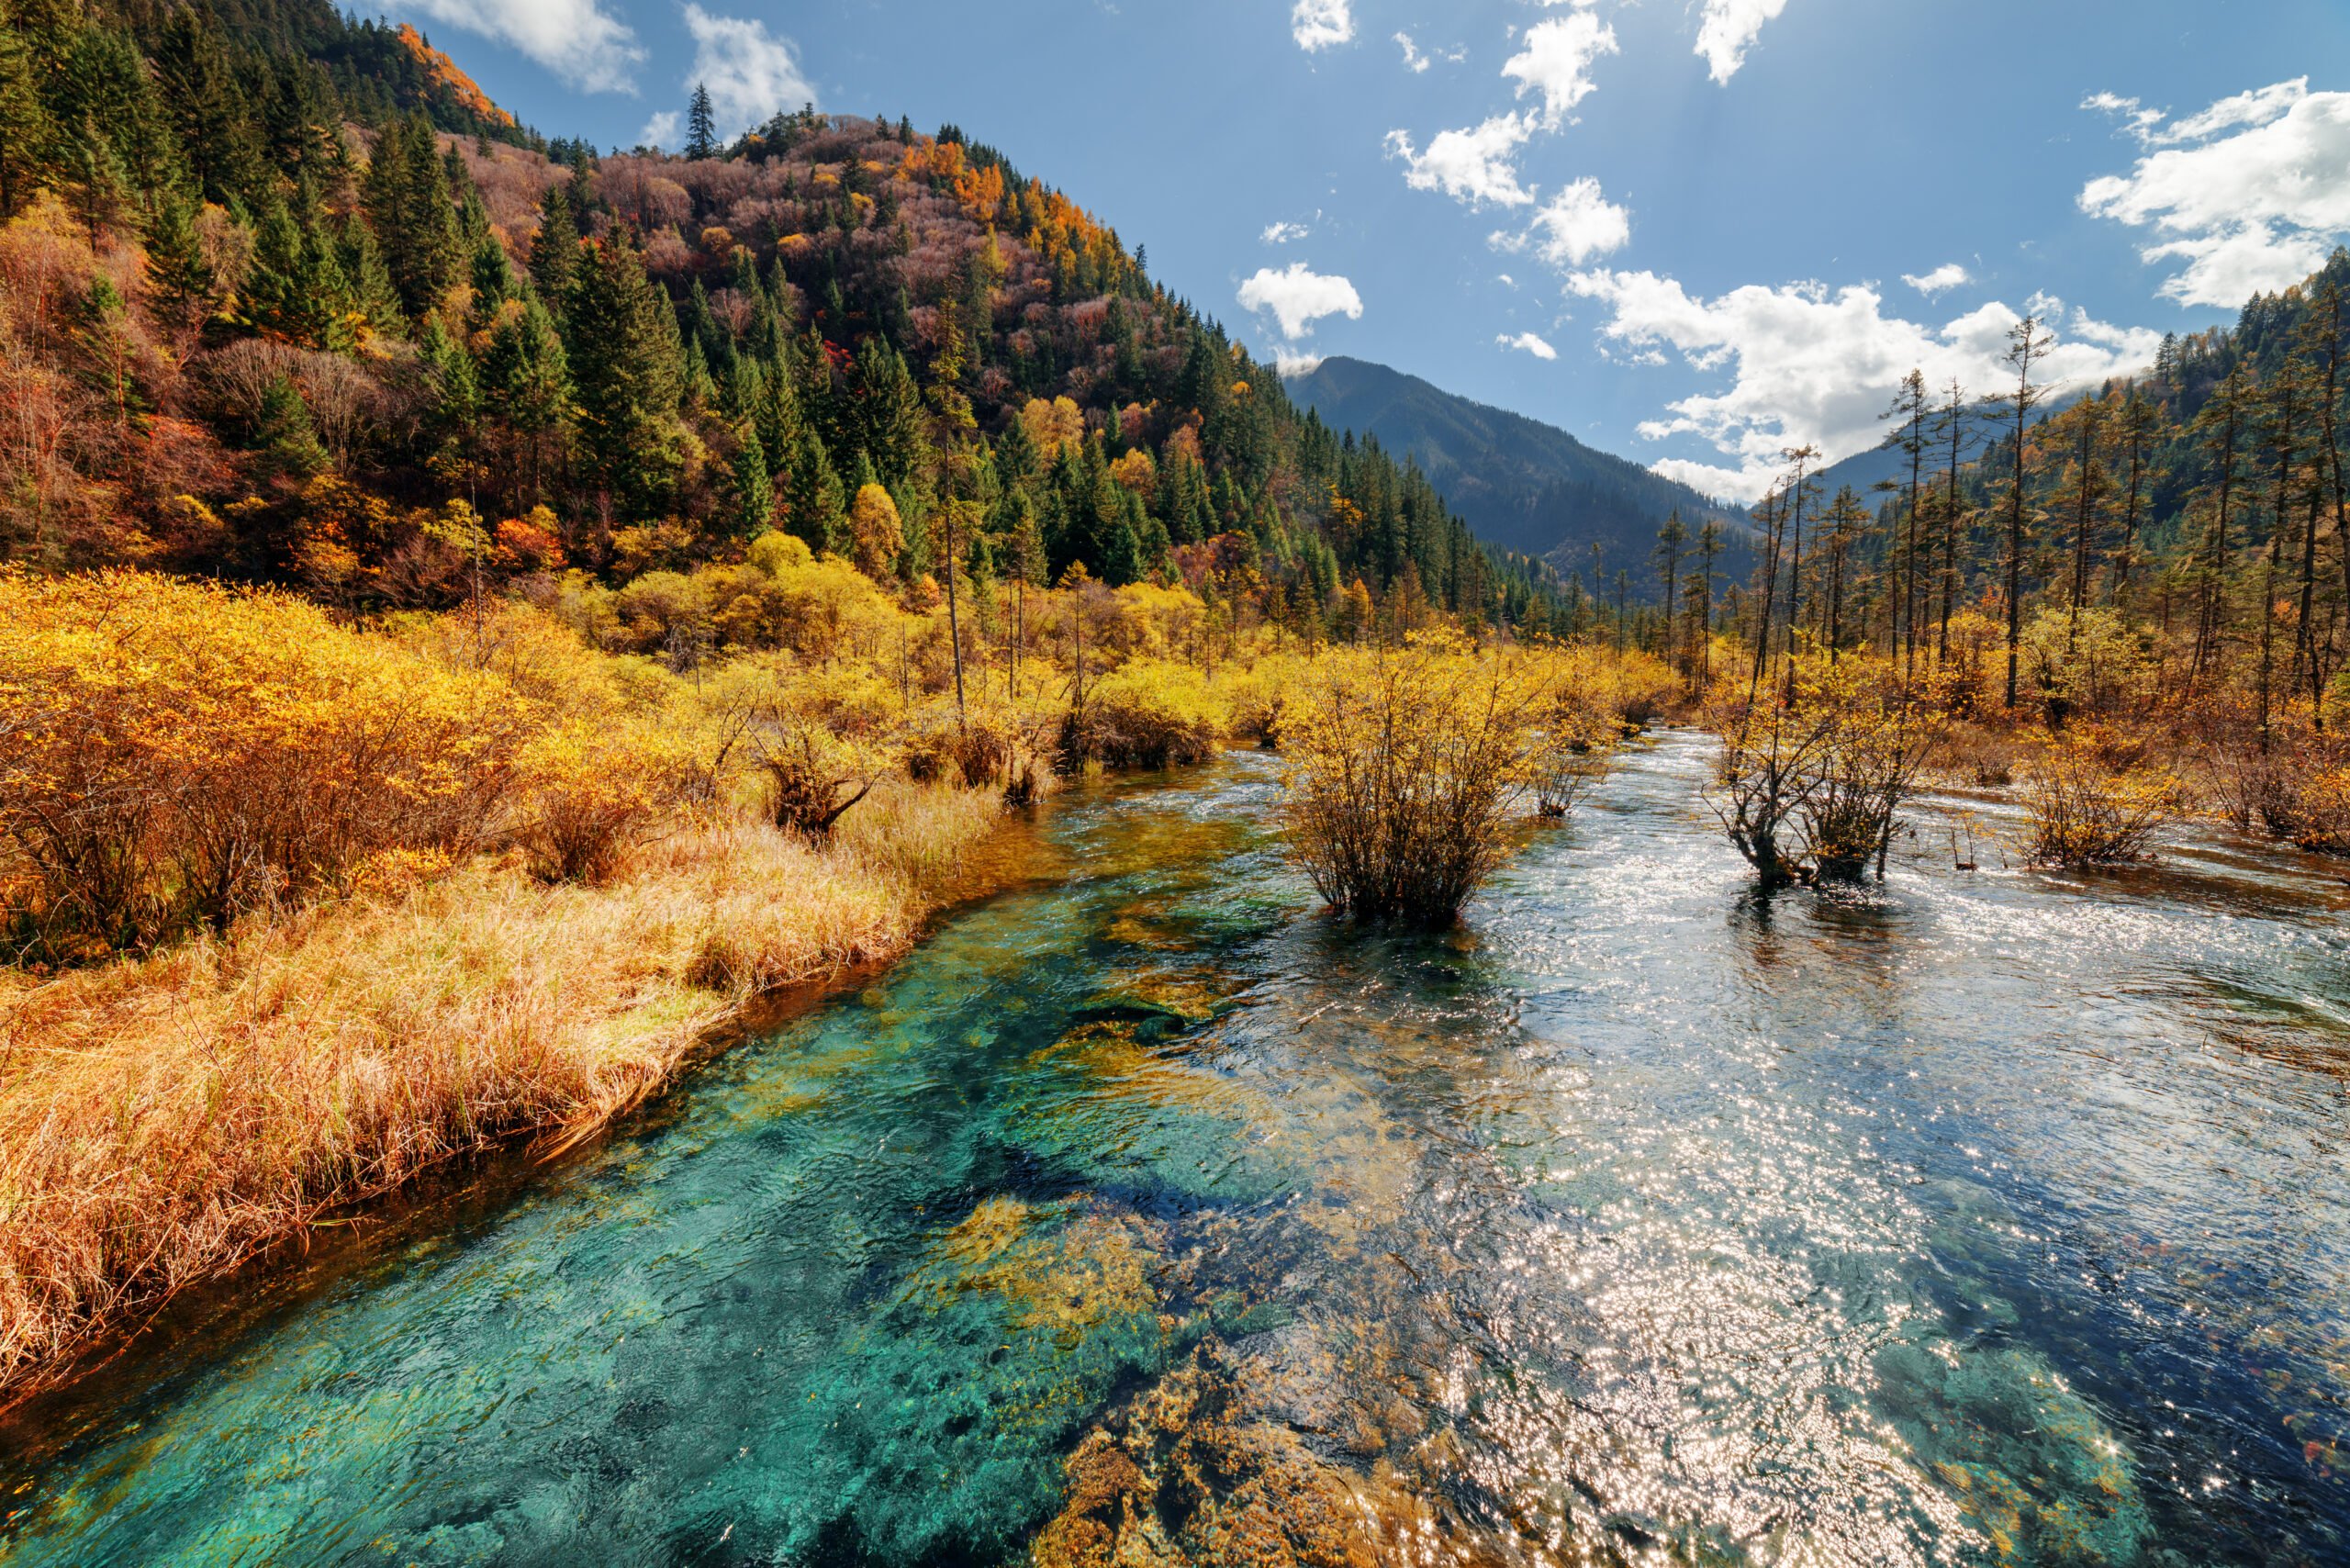 Marvel The Amazing Colors In Our Jiuzhaigou Valley 3 Day Package